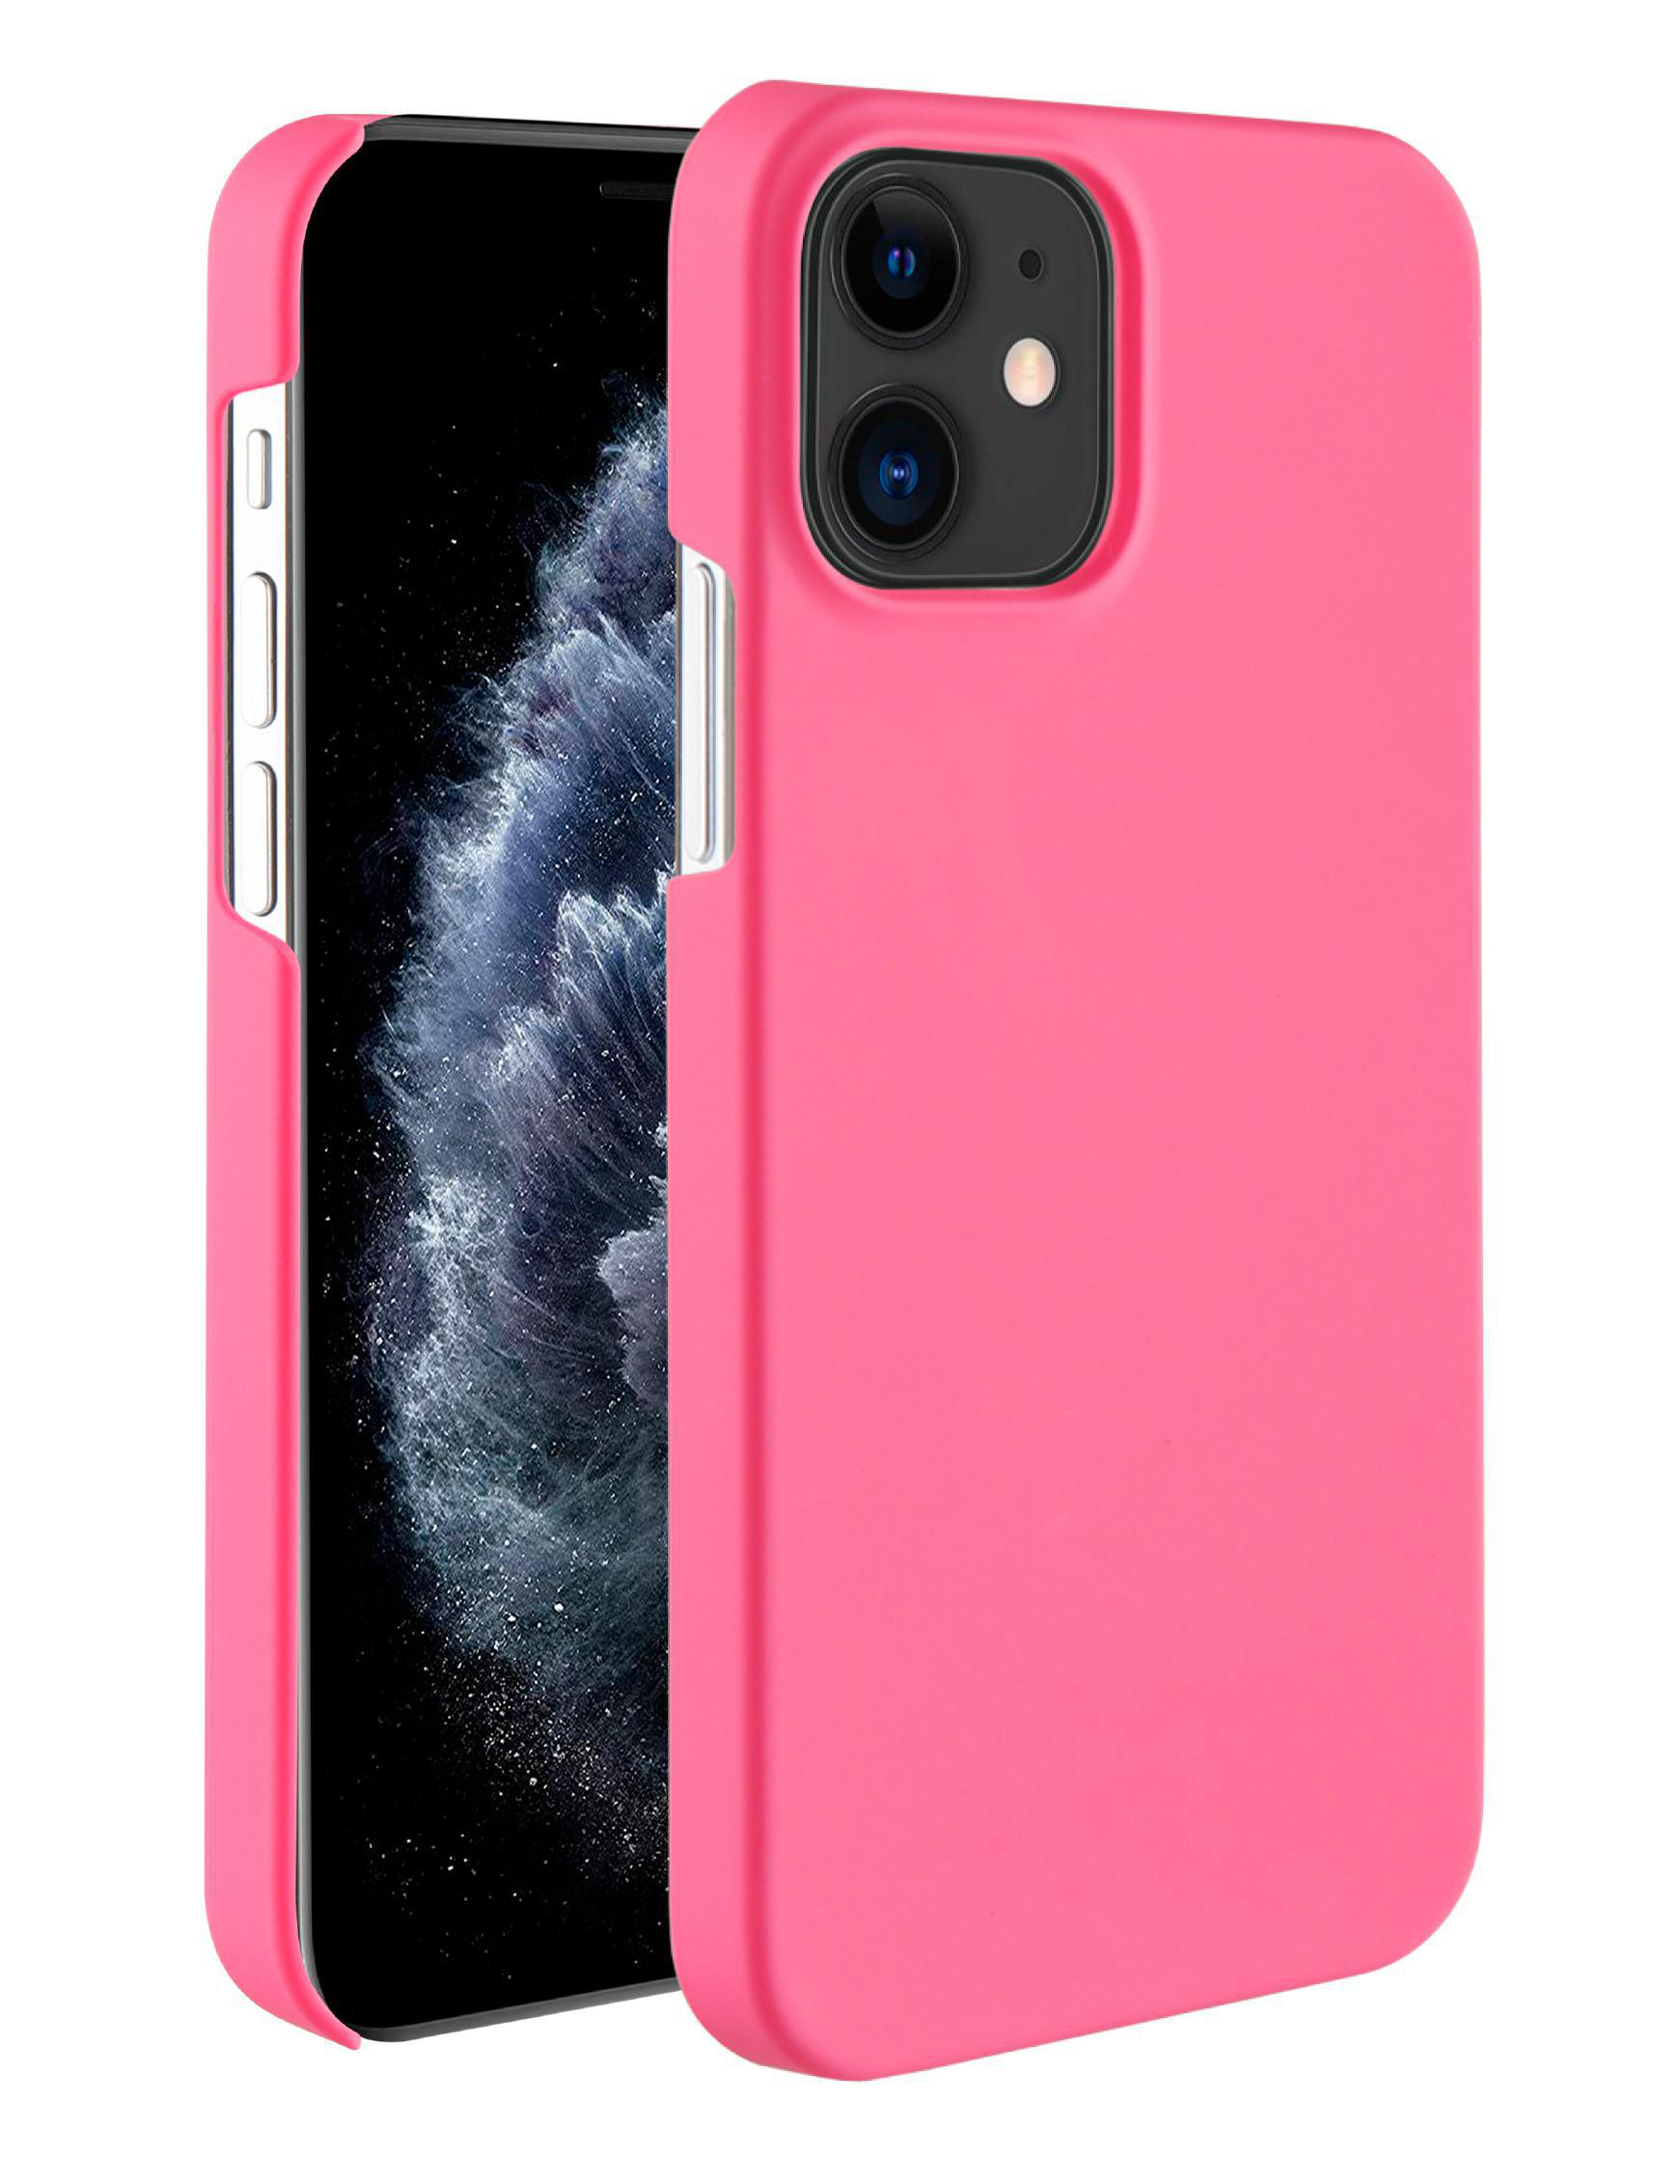 iPhone 12 12, Pro, Cover, Gentle Apple, iPhone Pink Backcover, VIVANCO